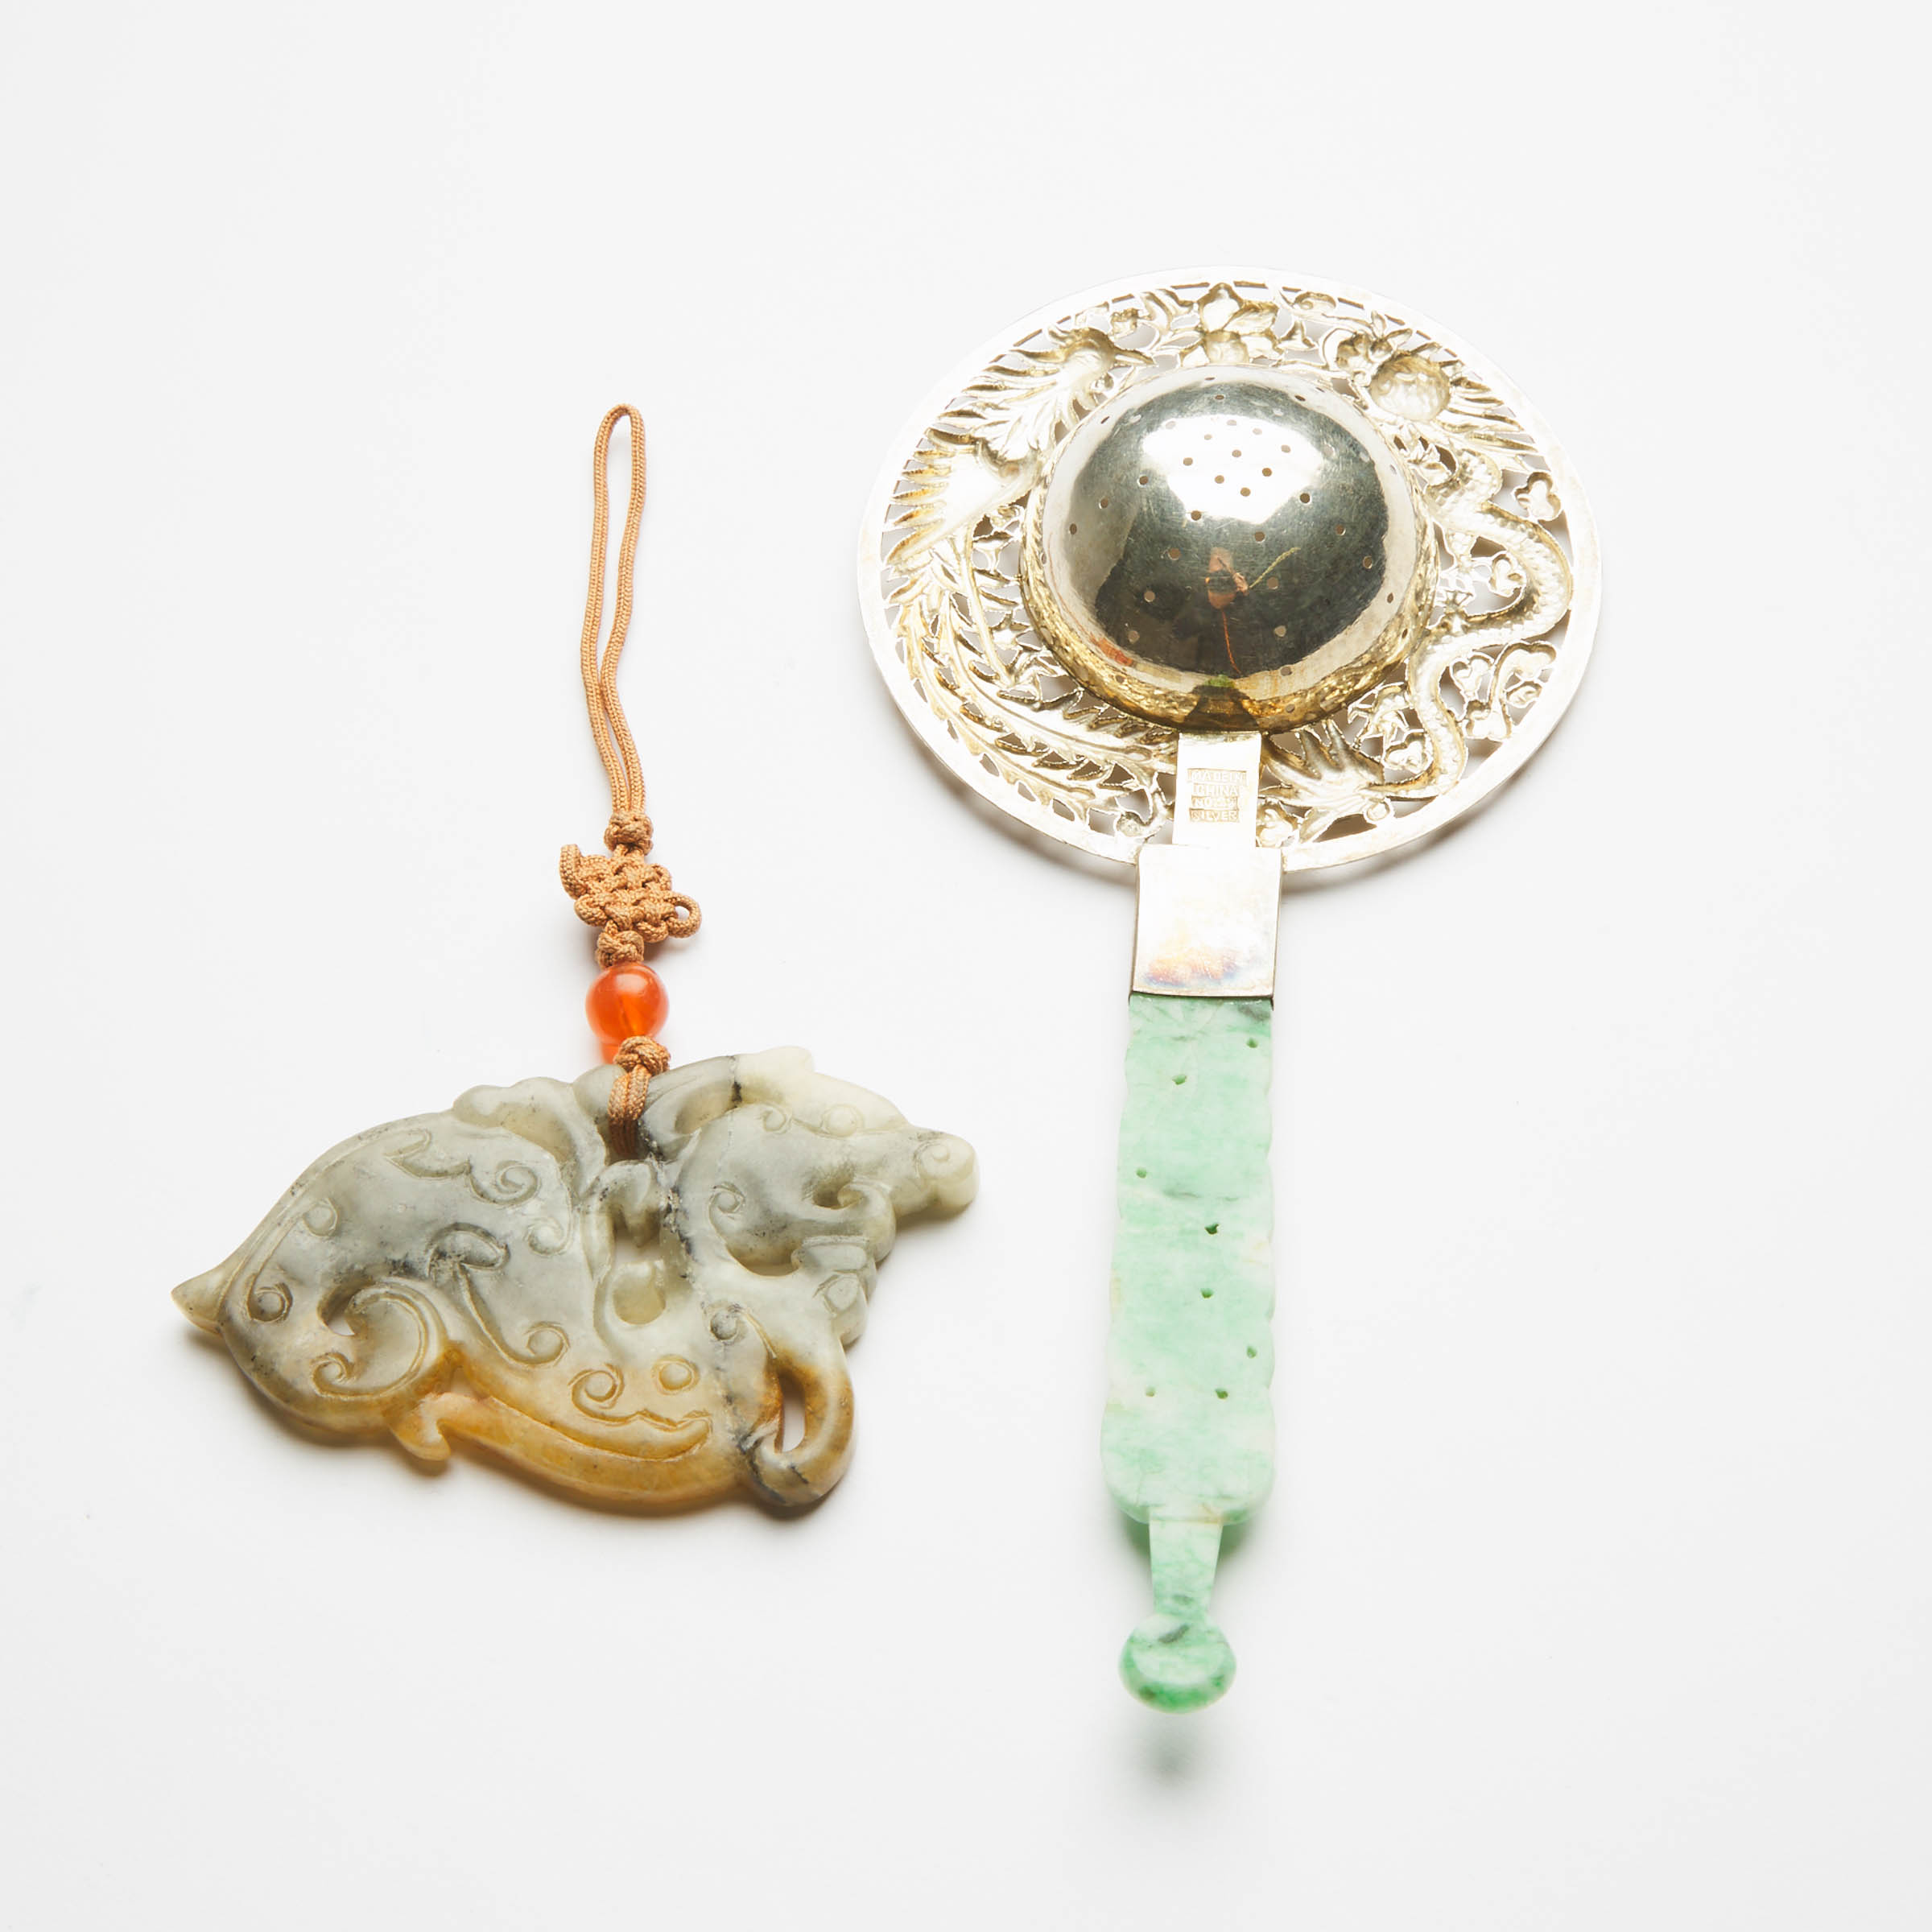 A Jadeite-Mounted Silver Tea Strainer, Together With a Greyish-White and Russet Jade 'Dragon' Pendant, 19th/20th Century